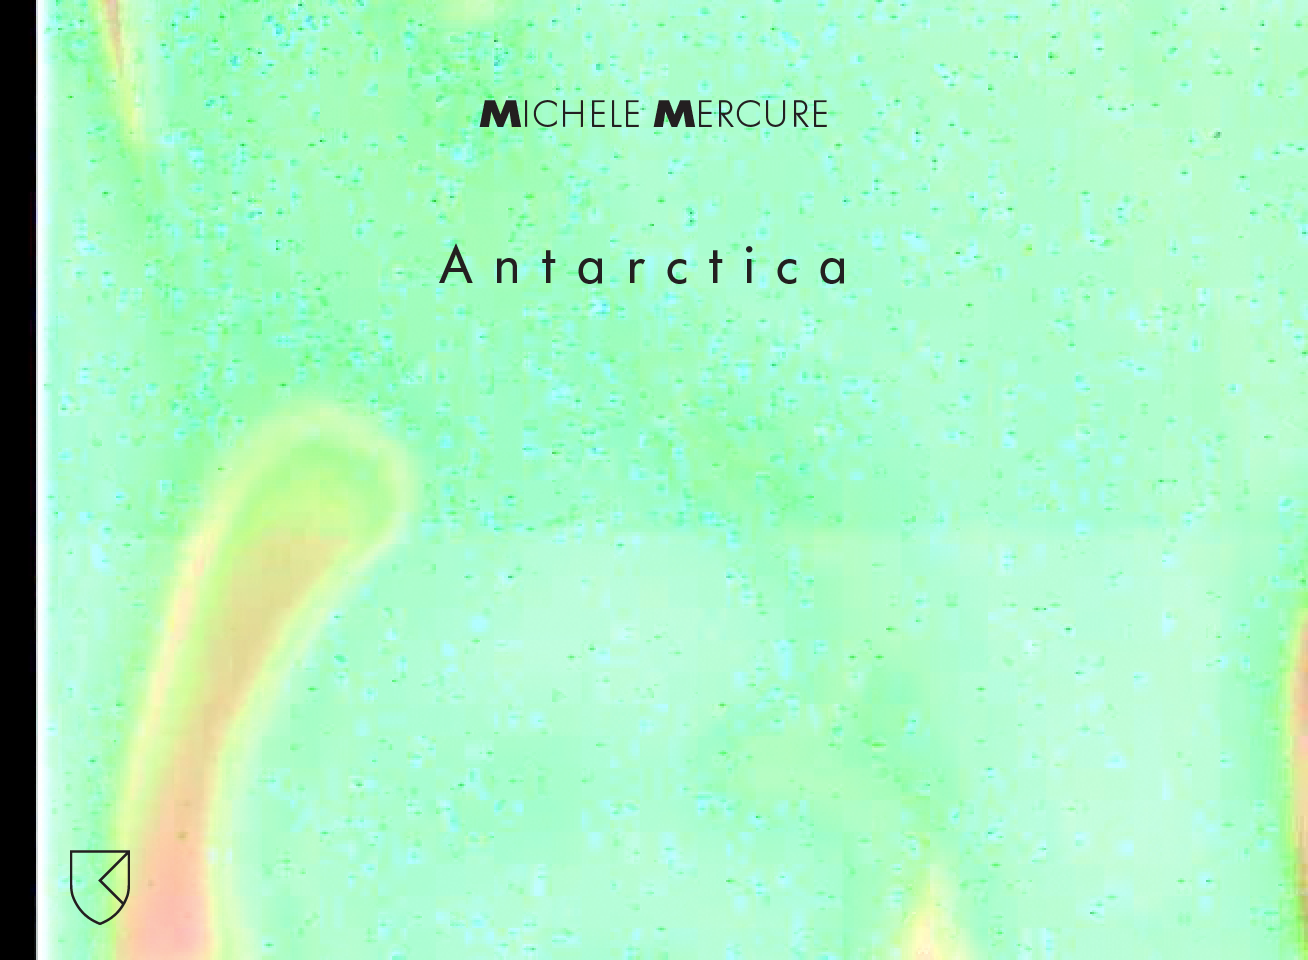 Link to Video for Michele Mercure – Antarctica